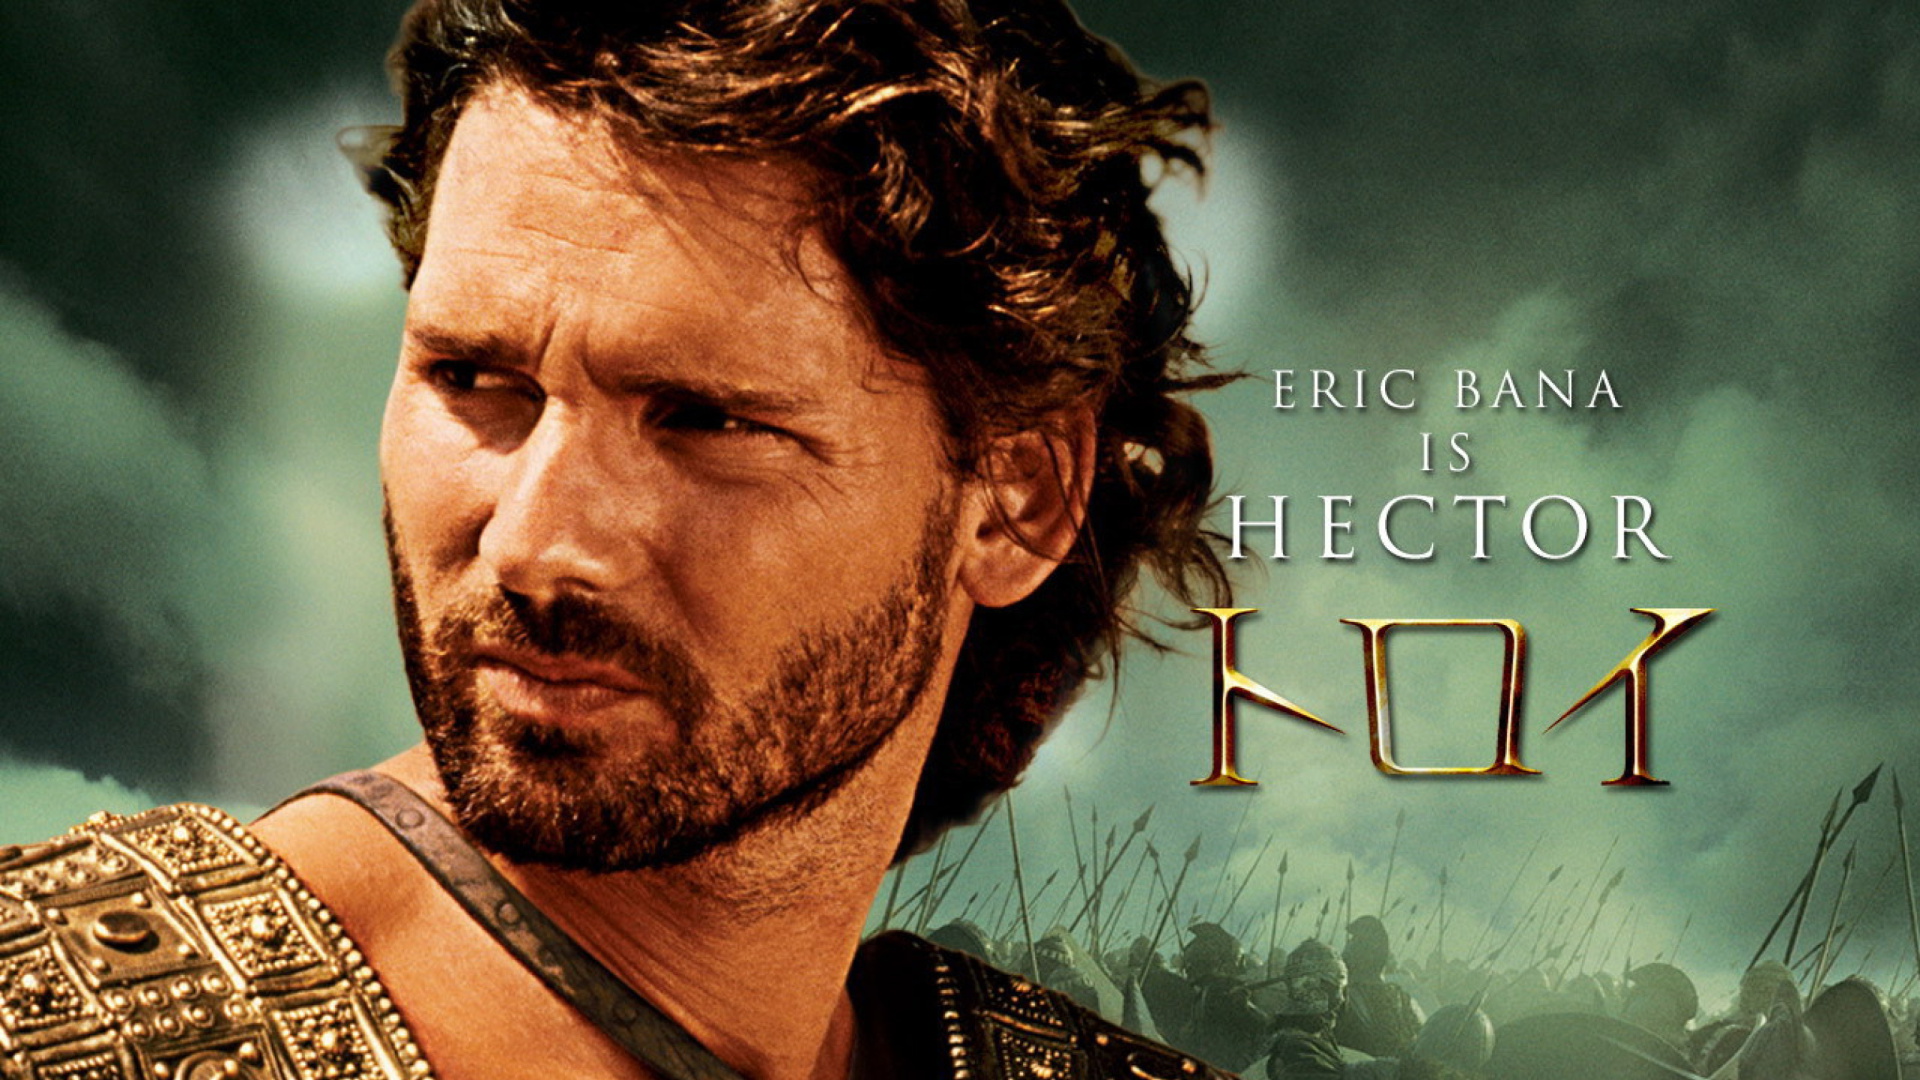 Eric Bana as Hector in Troy wallpaper 1920x1080